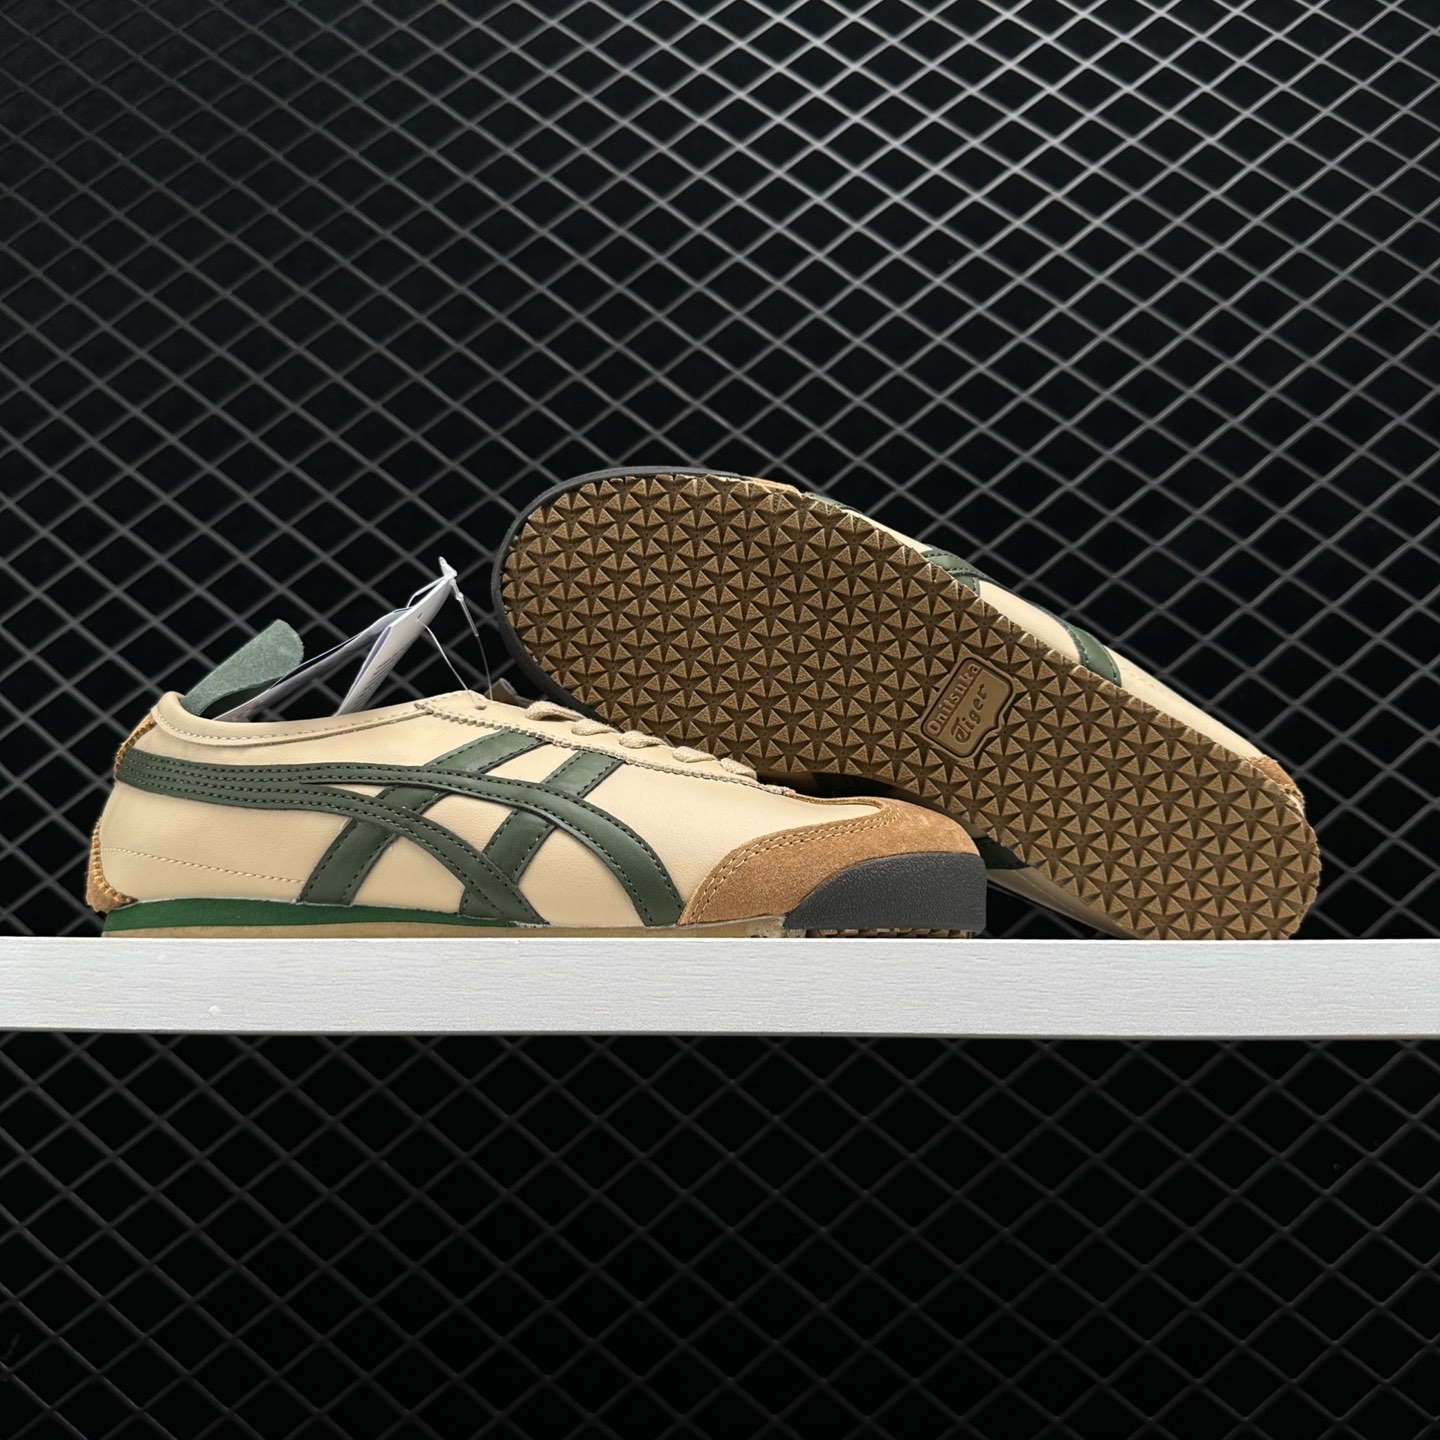 Onitsuka Tiger Mexico 66 Brown Green: Stylish and Versatile Sneakers!